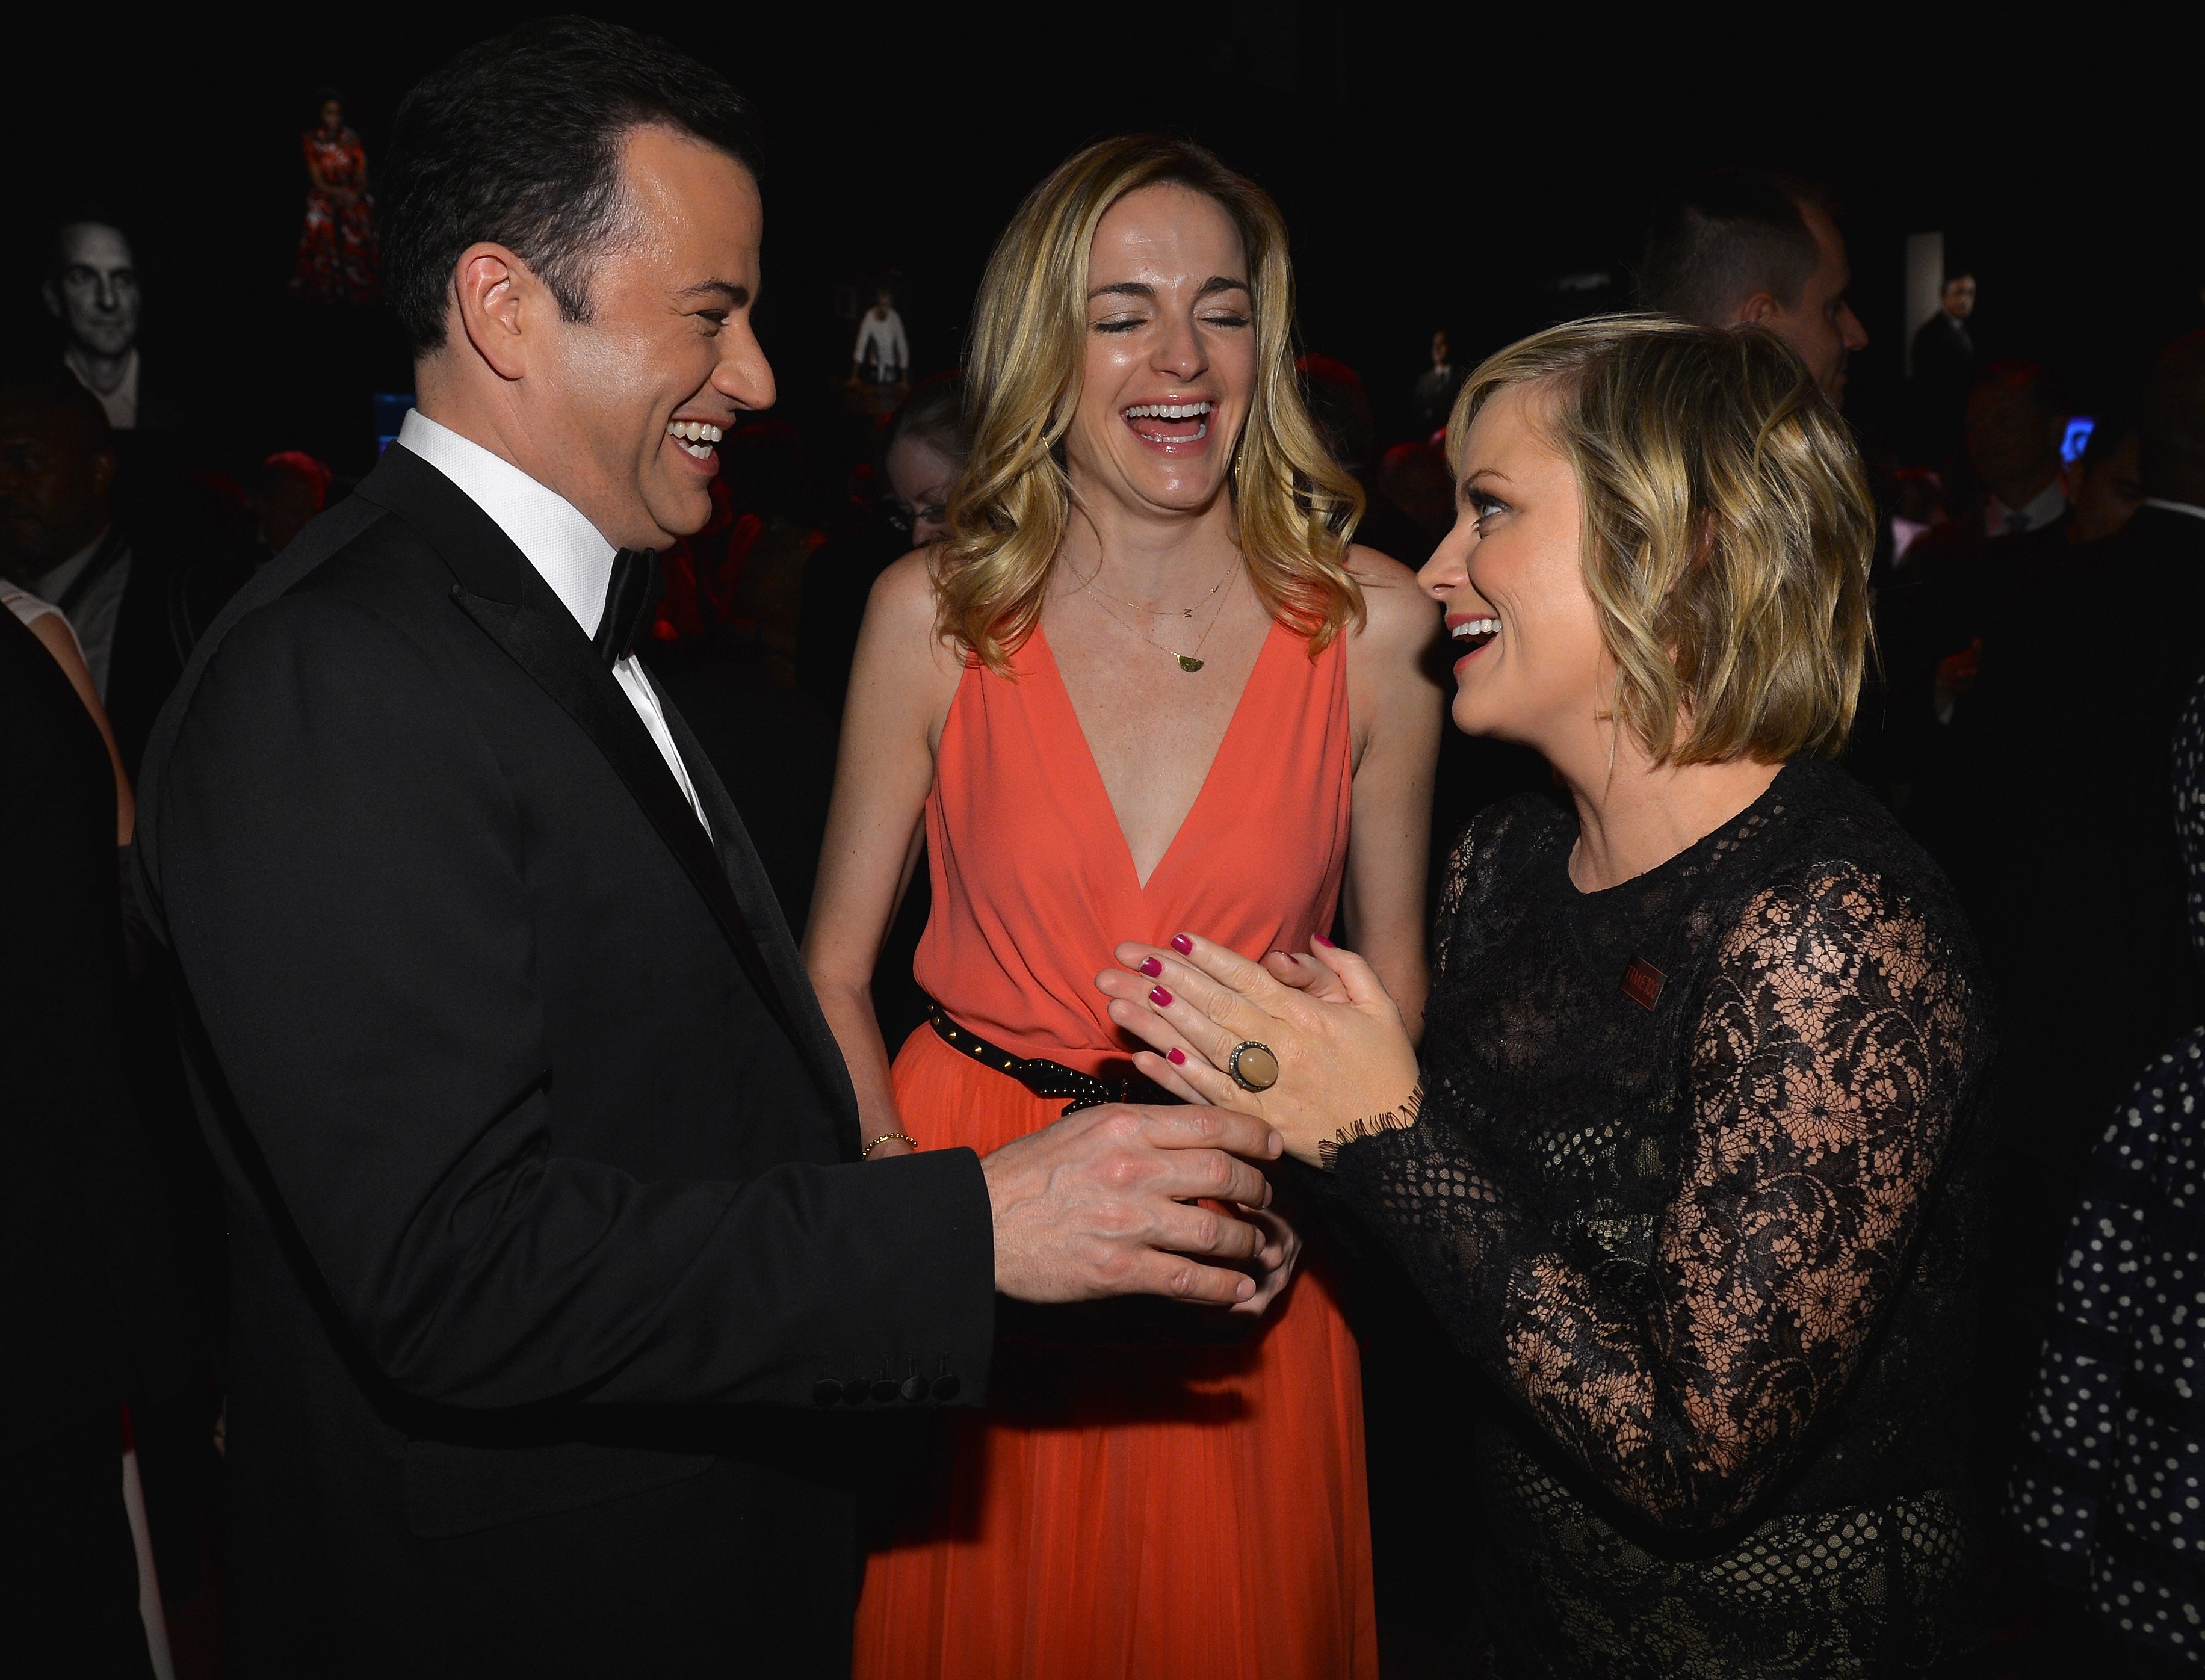 Jimmy Kimmel, Molly McNearney, and Amy Poehler at Lincoln Center on April 23, 2013 in New York City.  | Source: Getty Images